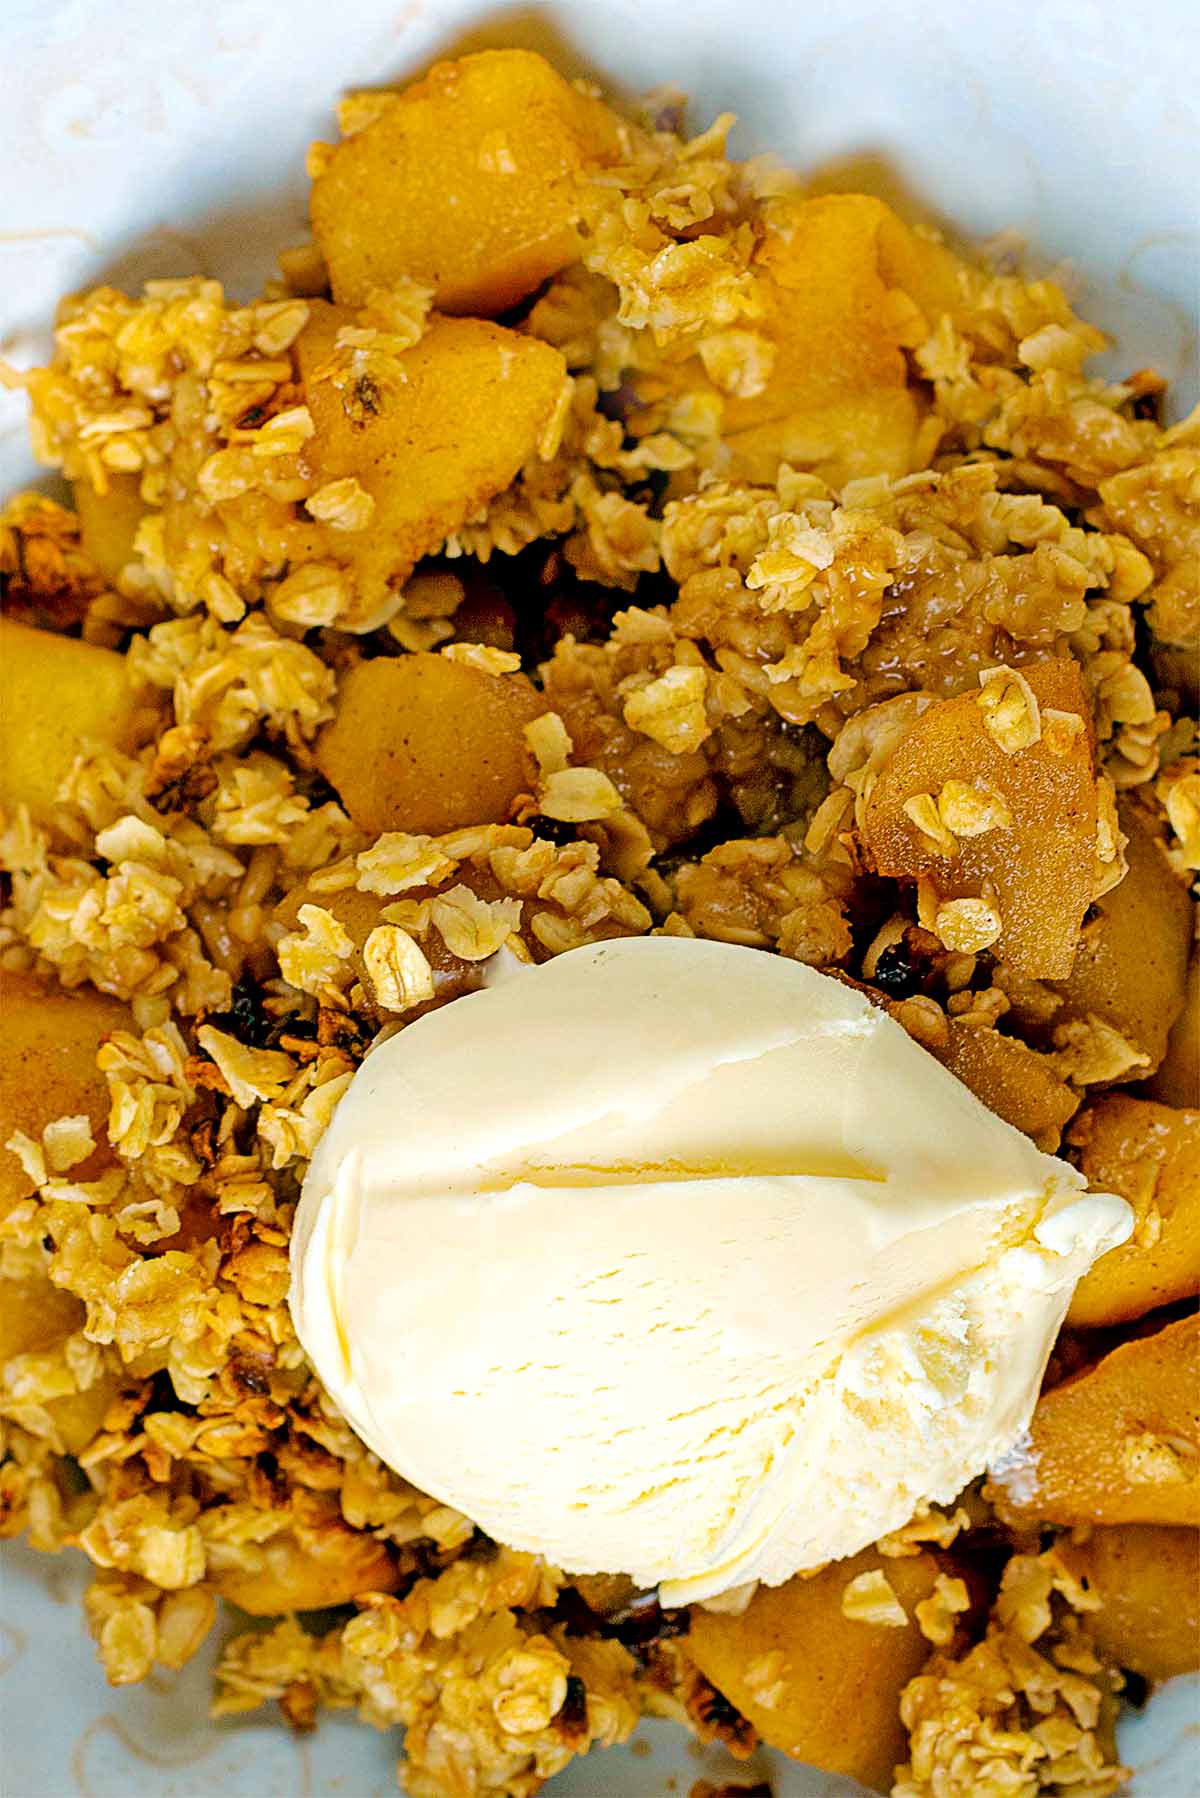 A ball of vanilla ice cream sat on top of some apple crumble.